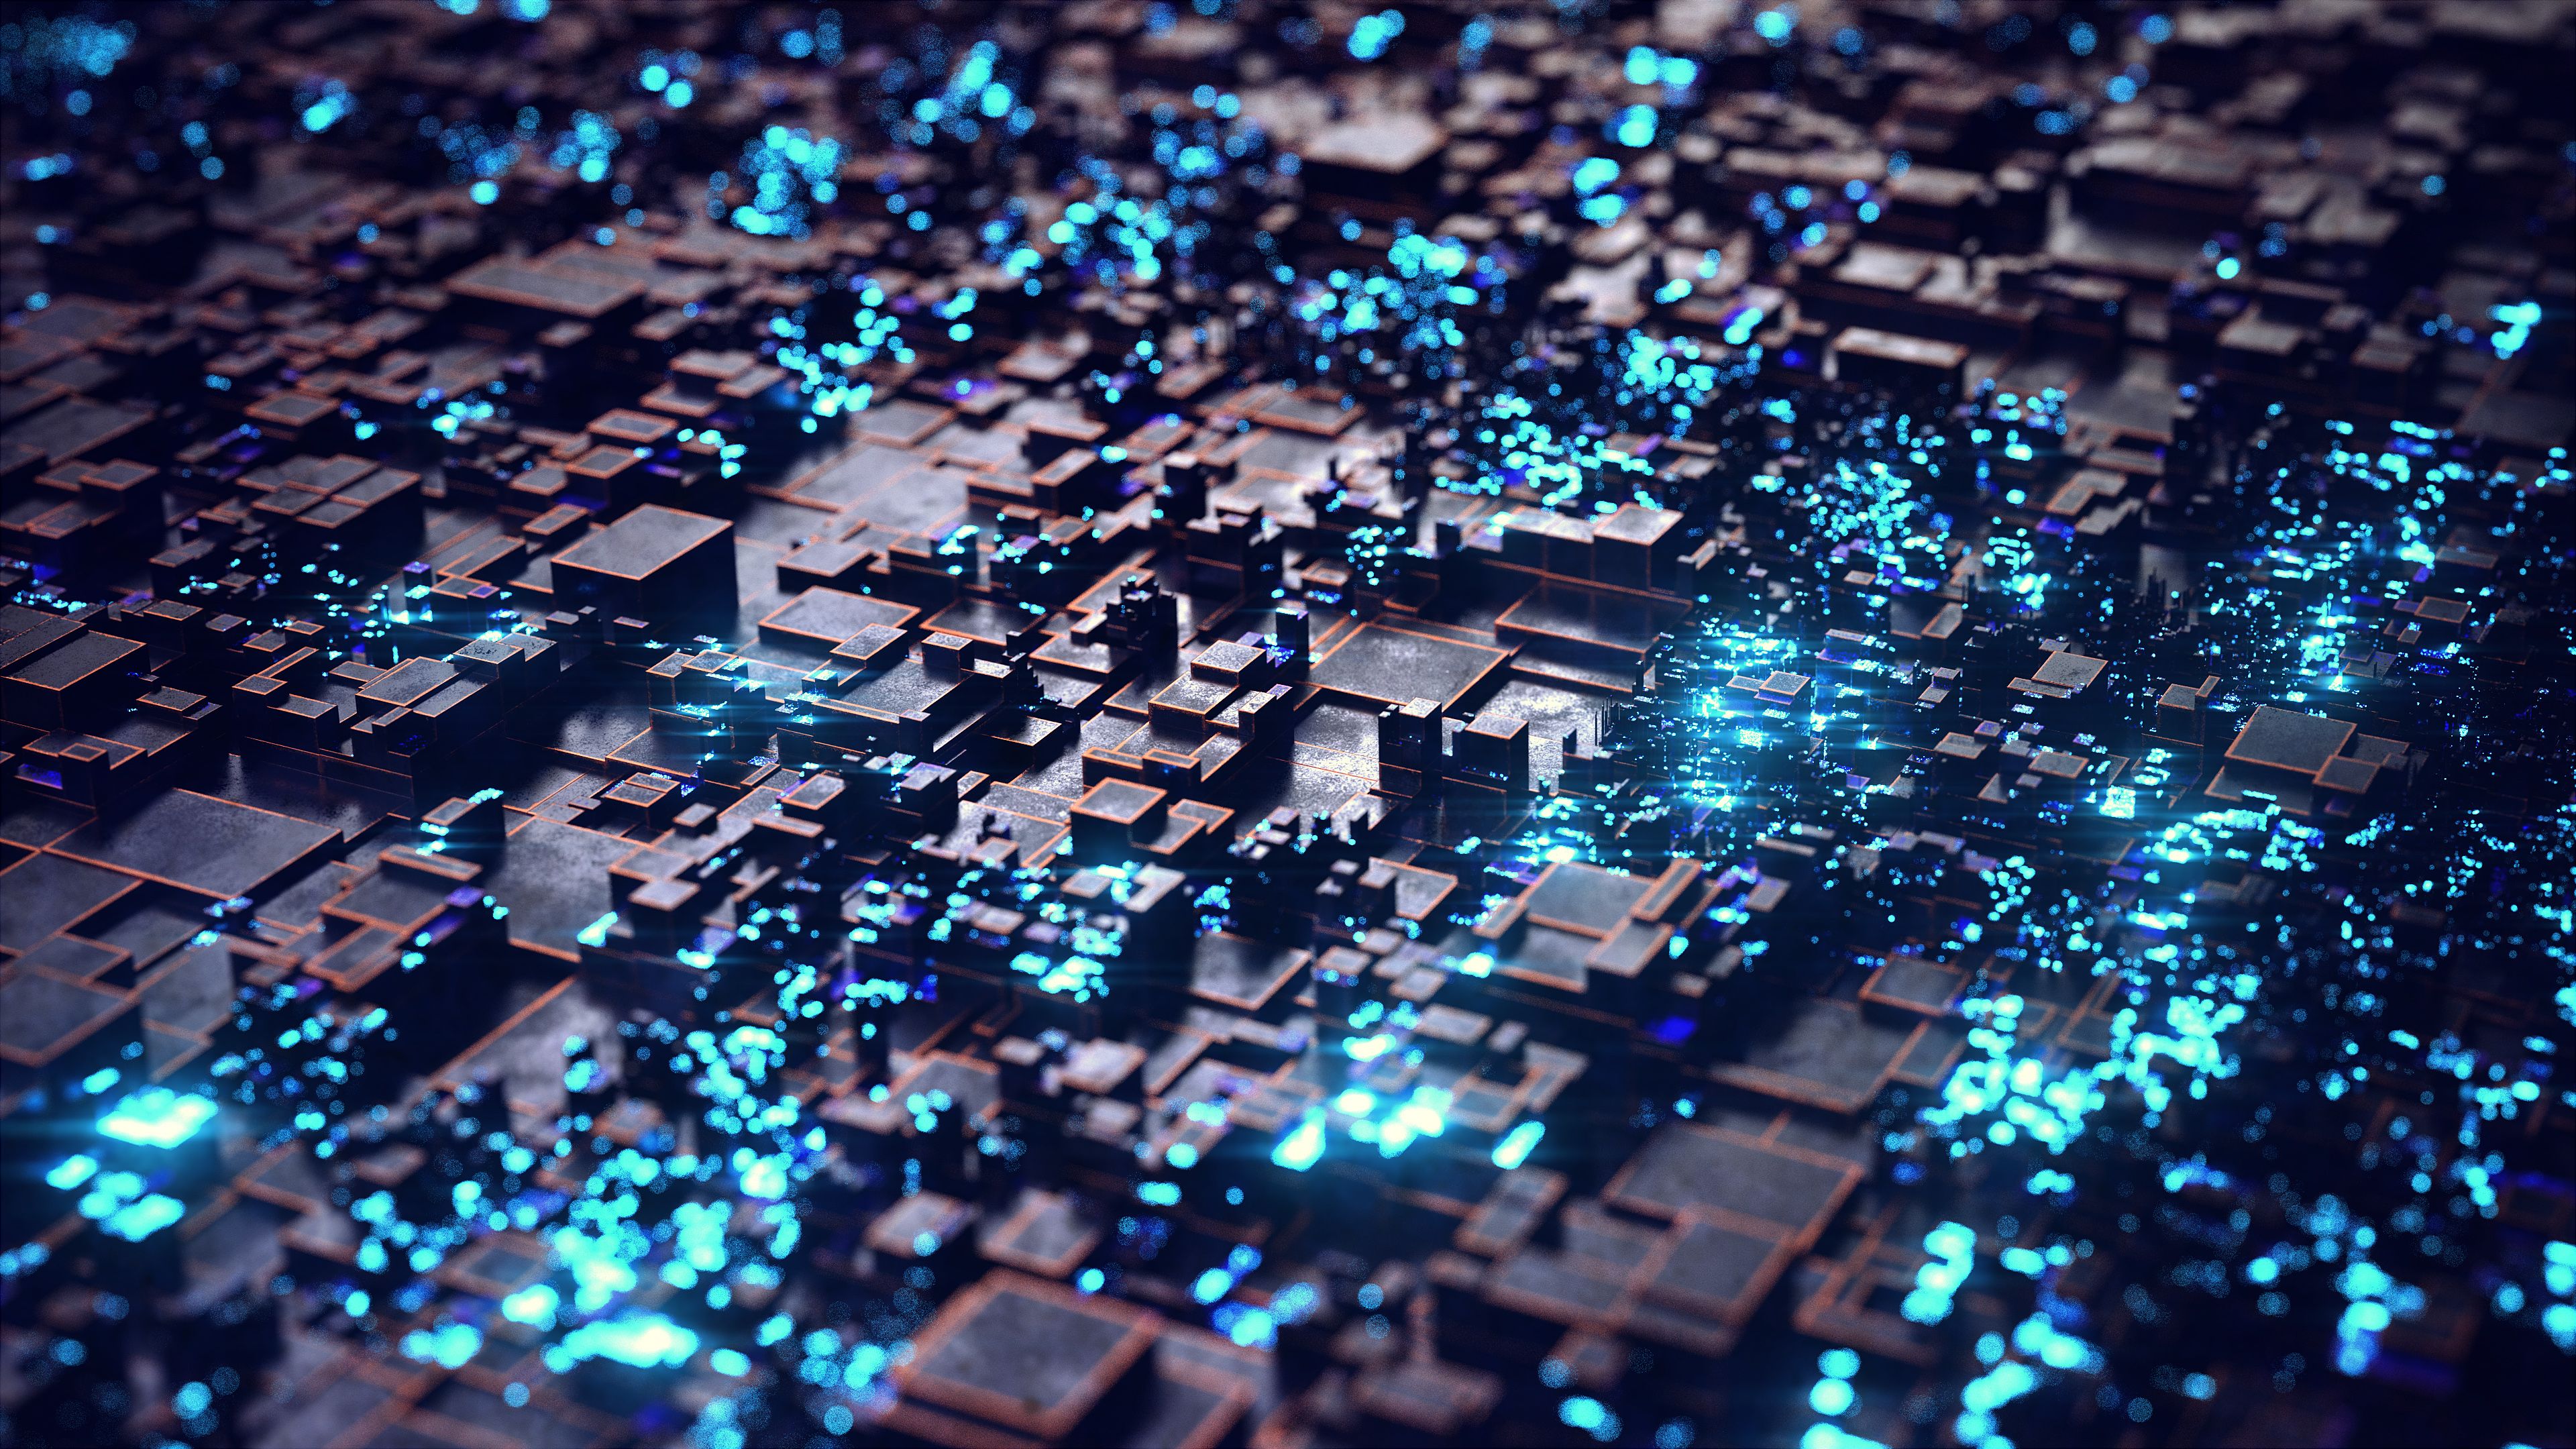 An abstract image of a digital city with glowing lights - Cyan